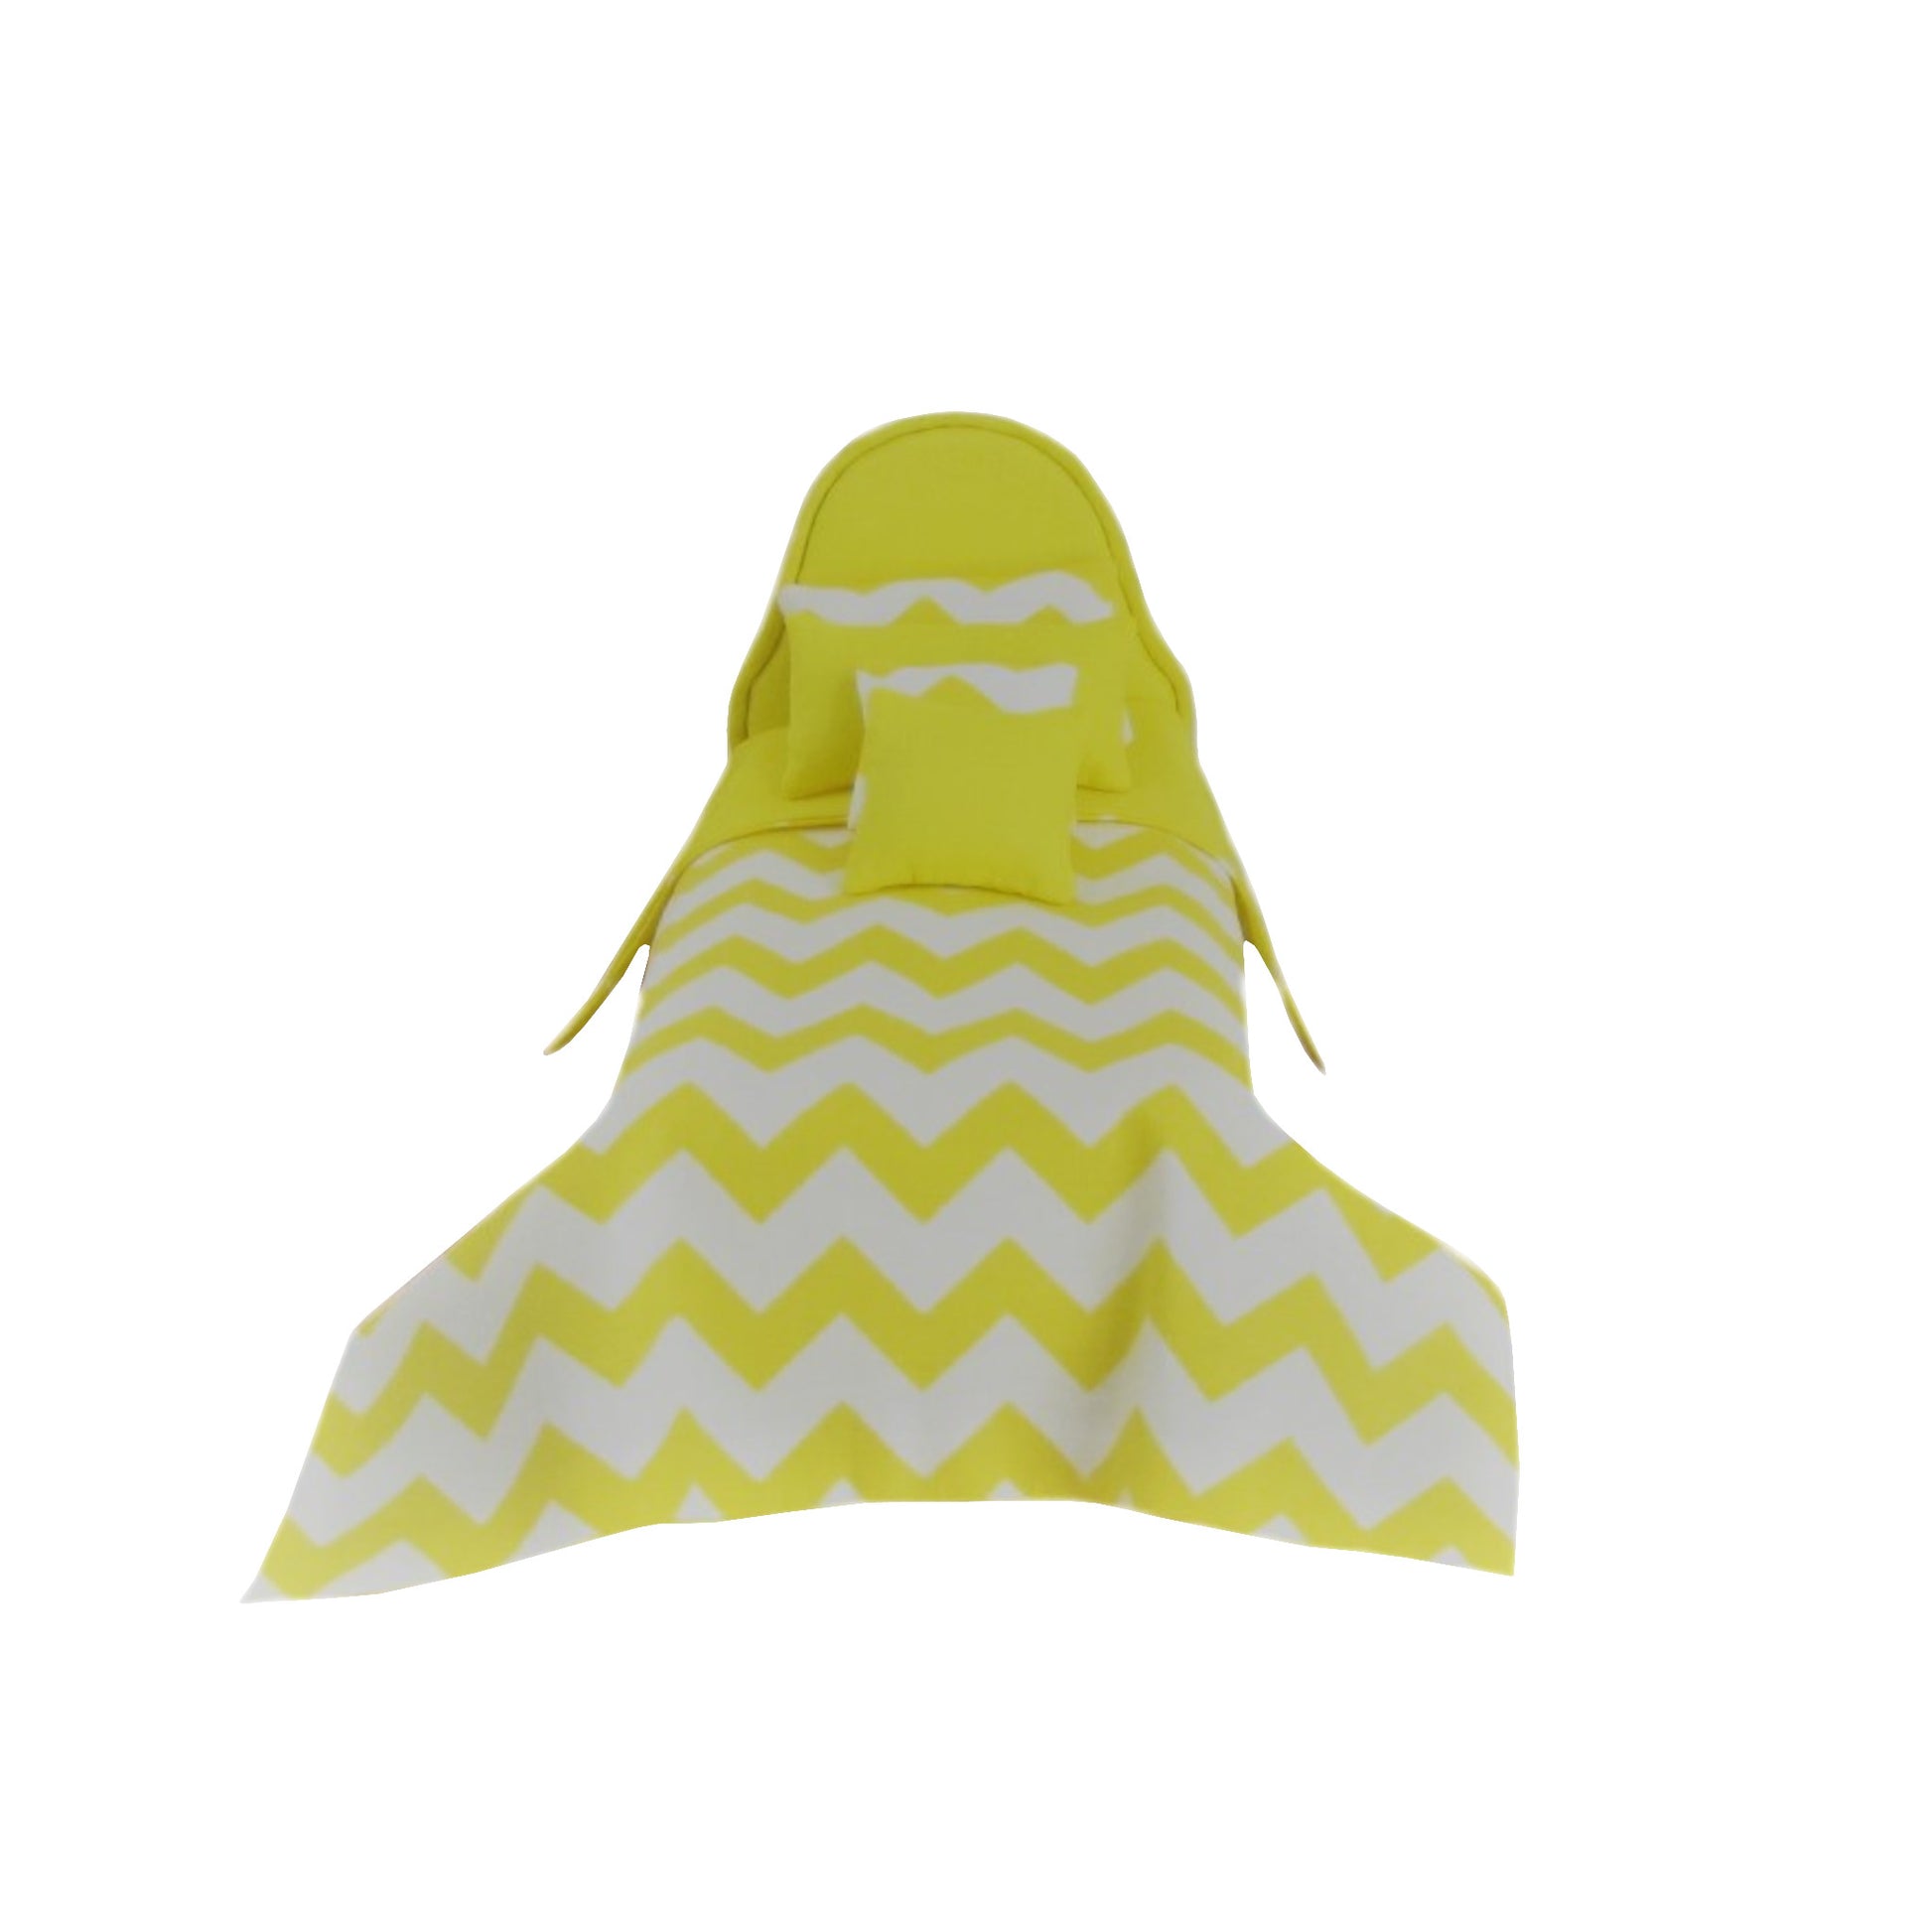 Bright Yellow Doll Bed and Chevron Doll Bedding for 6.5-inch dolls